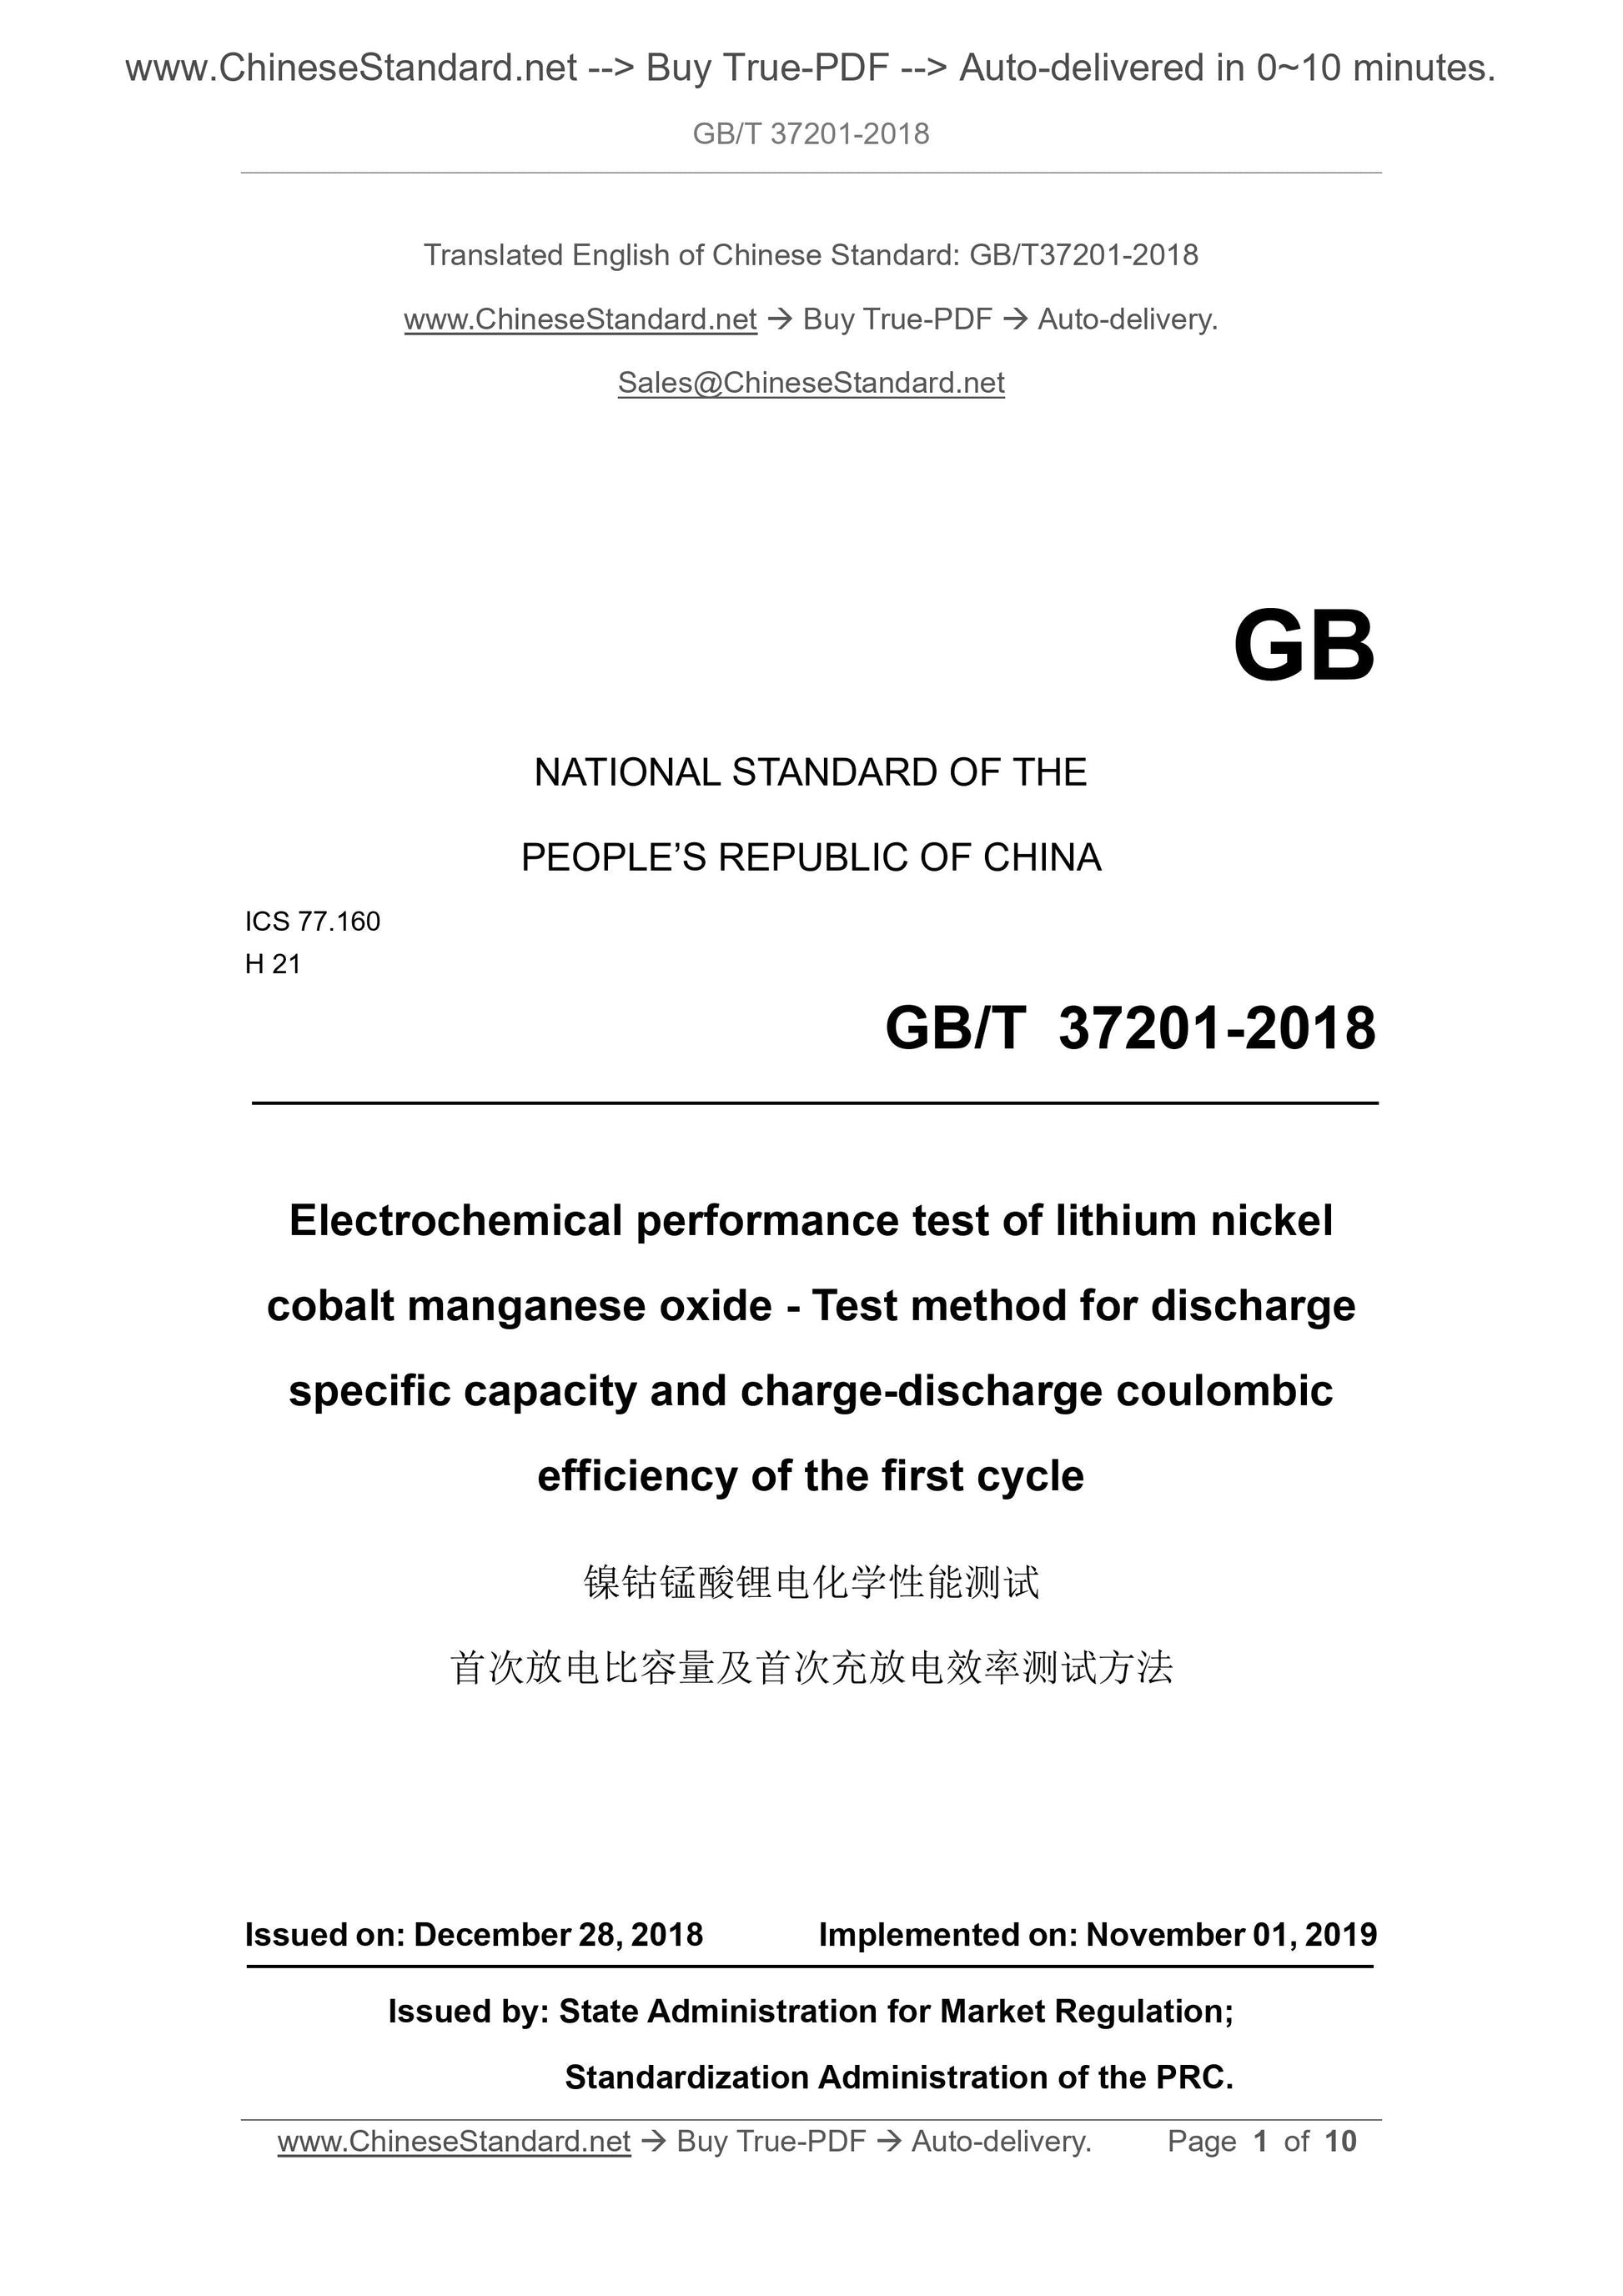 GB/T 37201-2018 Page 1